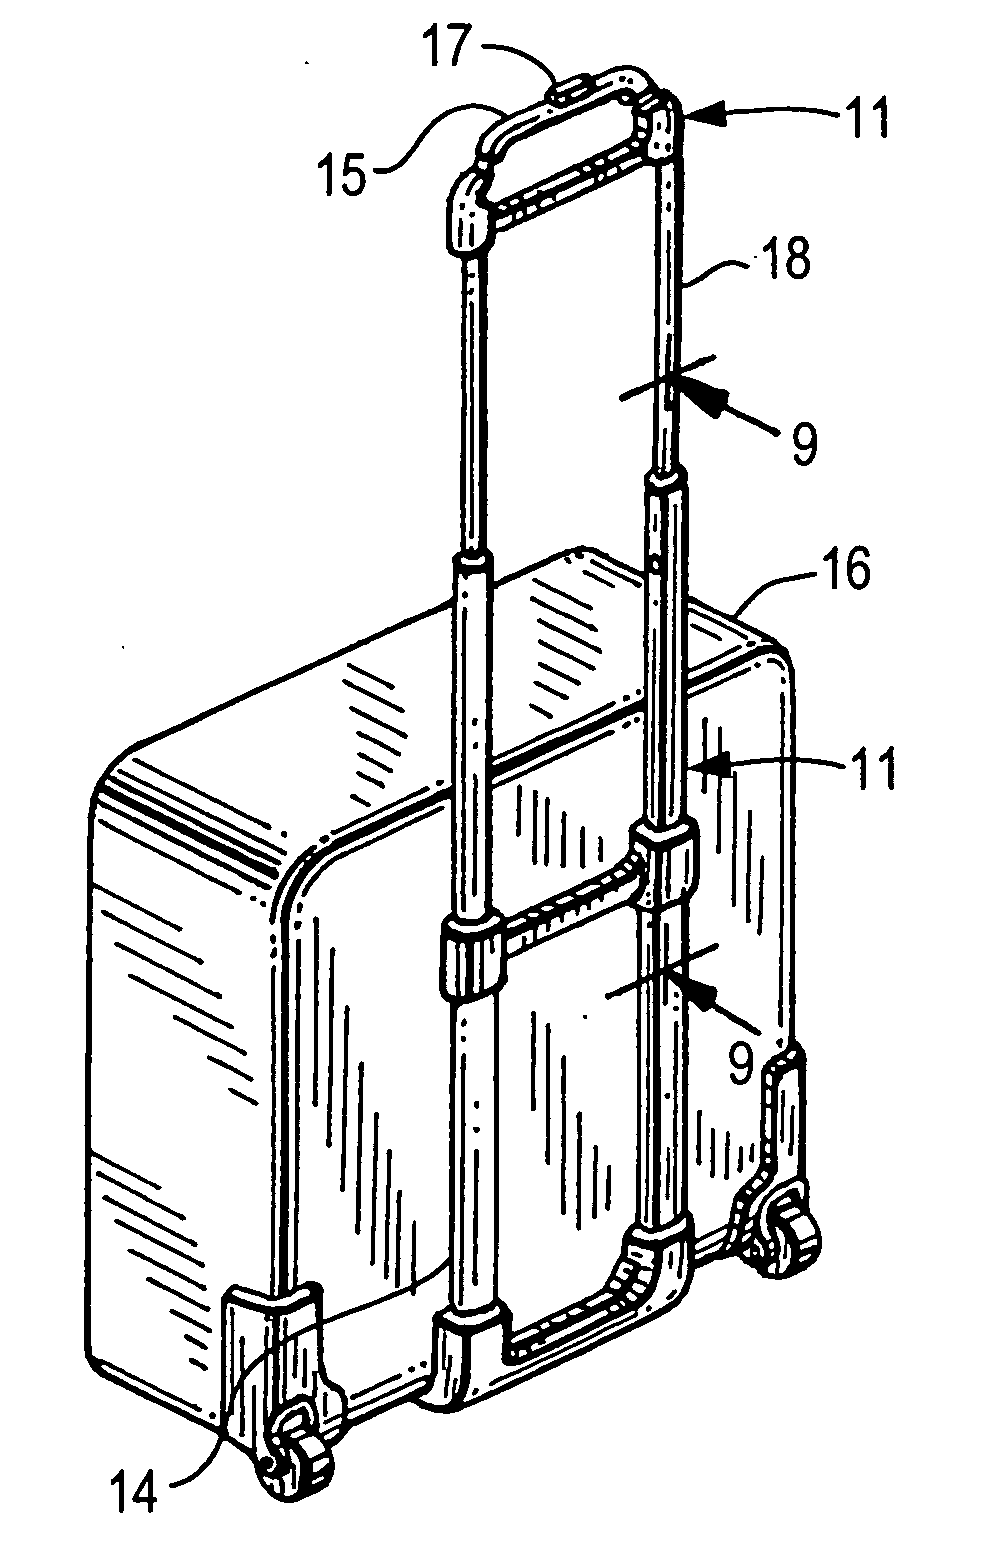 Reinforced extruded tubing for telescopic handle for trolley-type carry case and carry case incorporating same